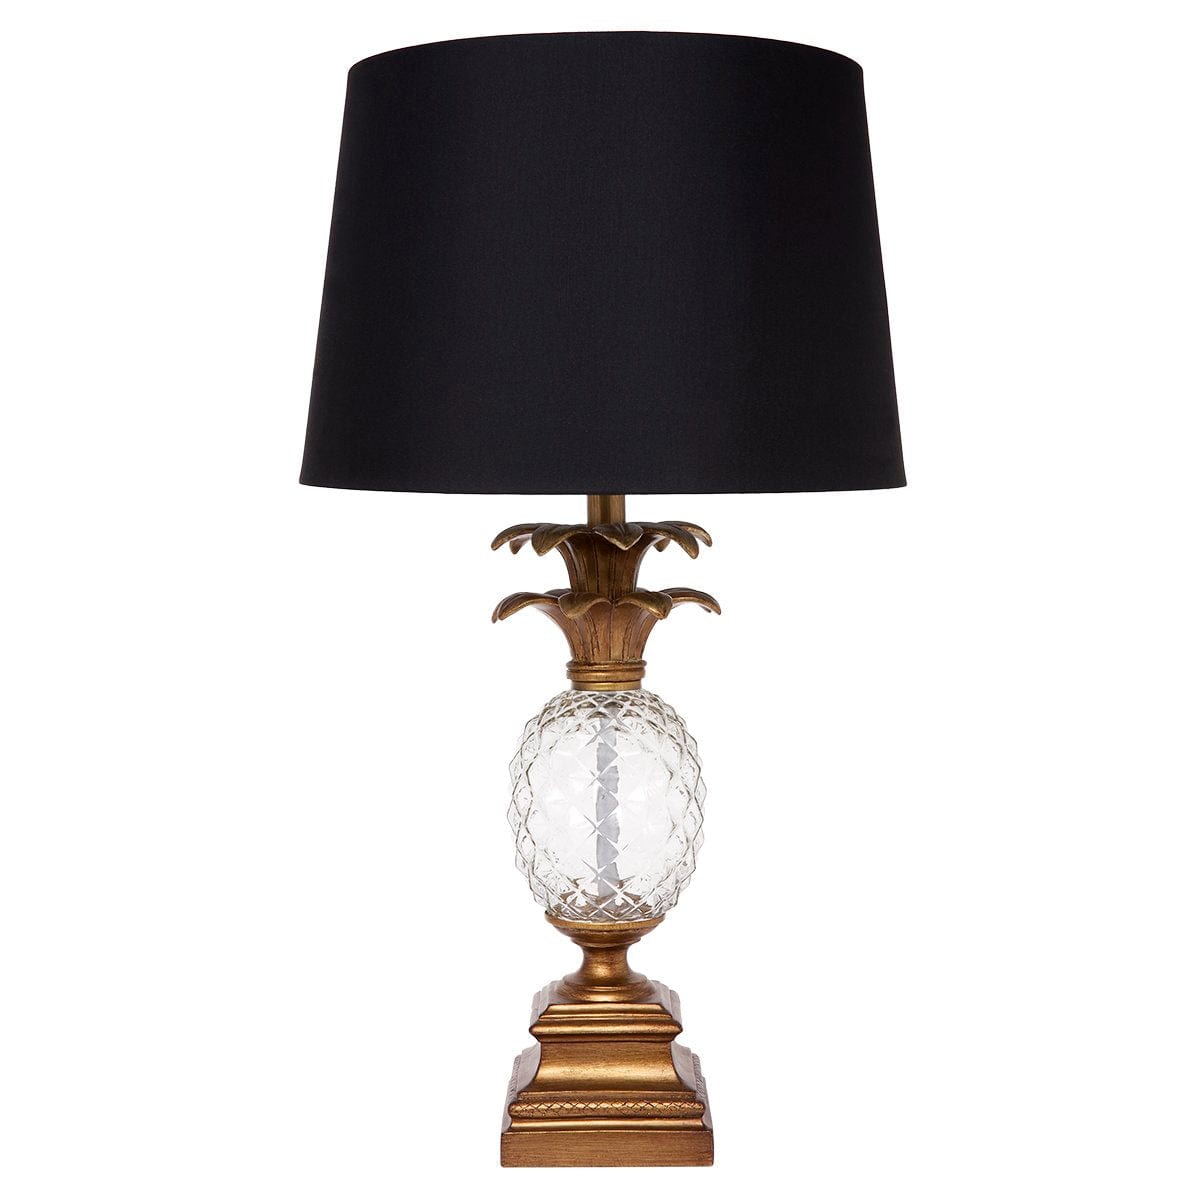 CAFE LIGHTING & LIVING Table Lamp Langley Table Lamp - Antique Gold 11676